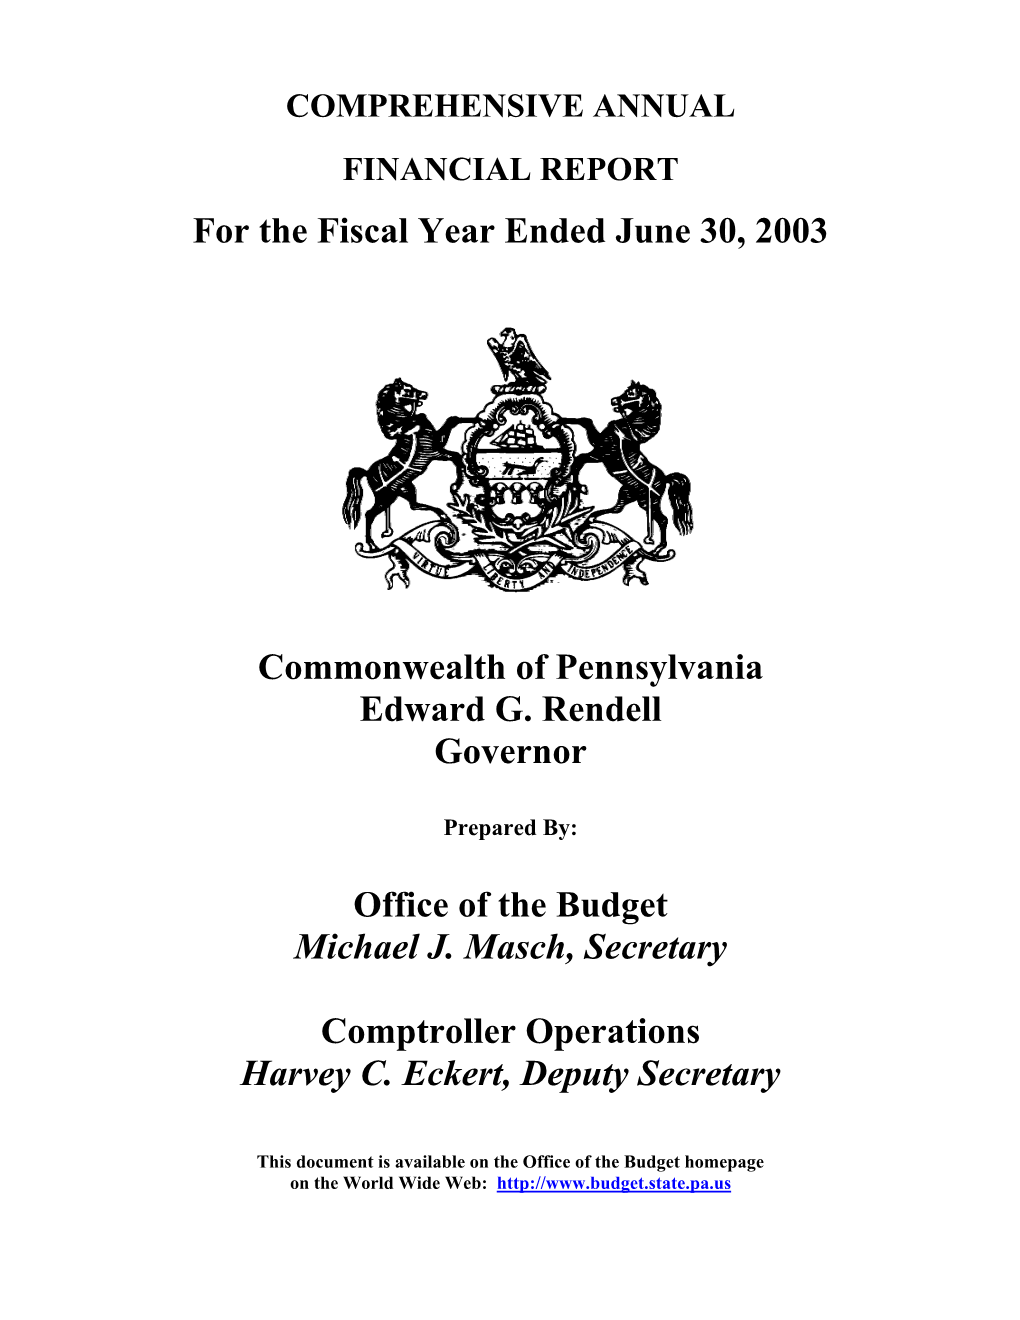 For the Fiscal Year Ended June 30, 2003